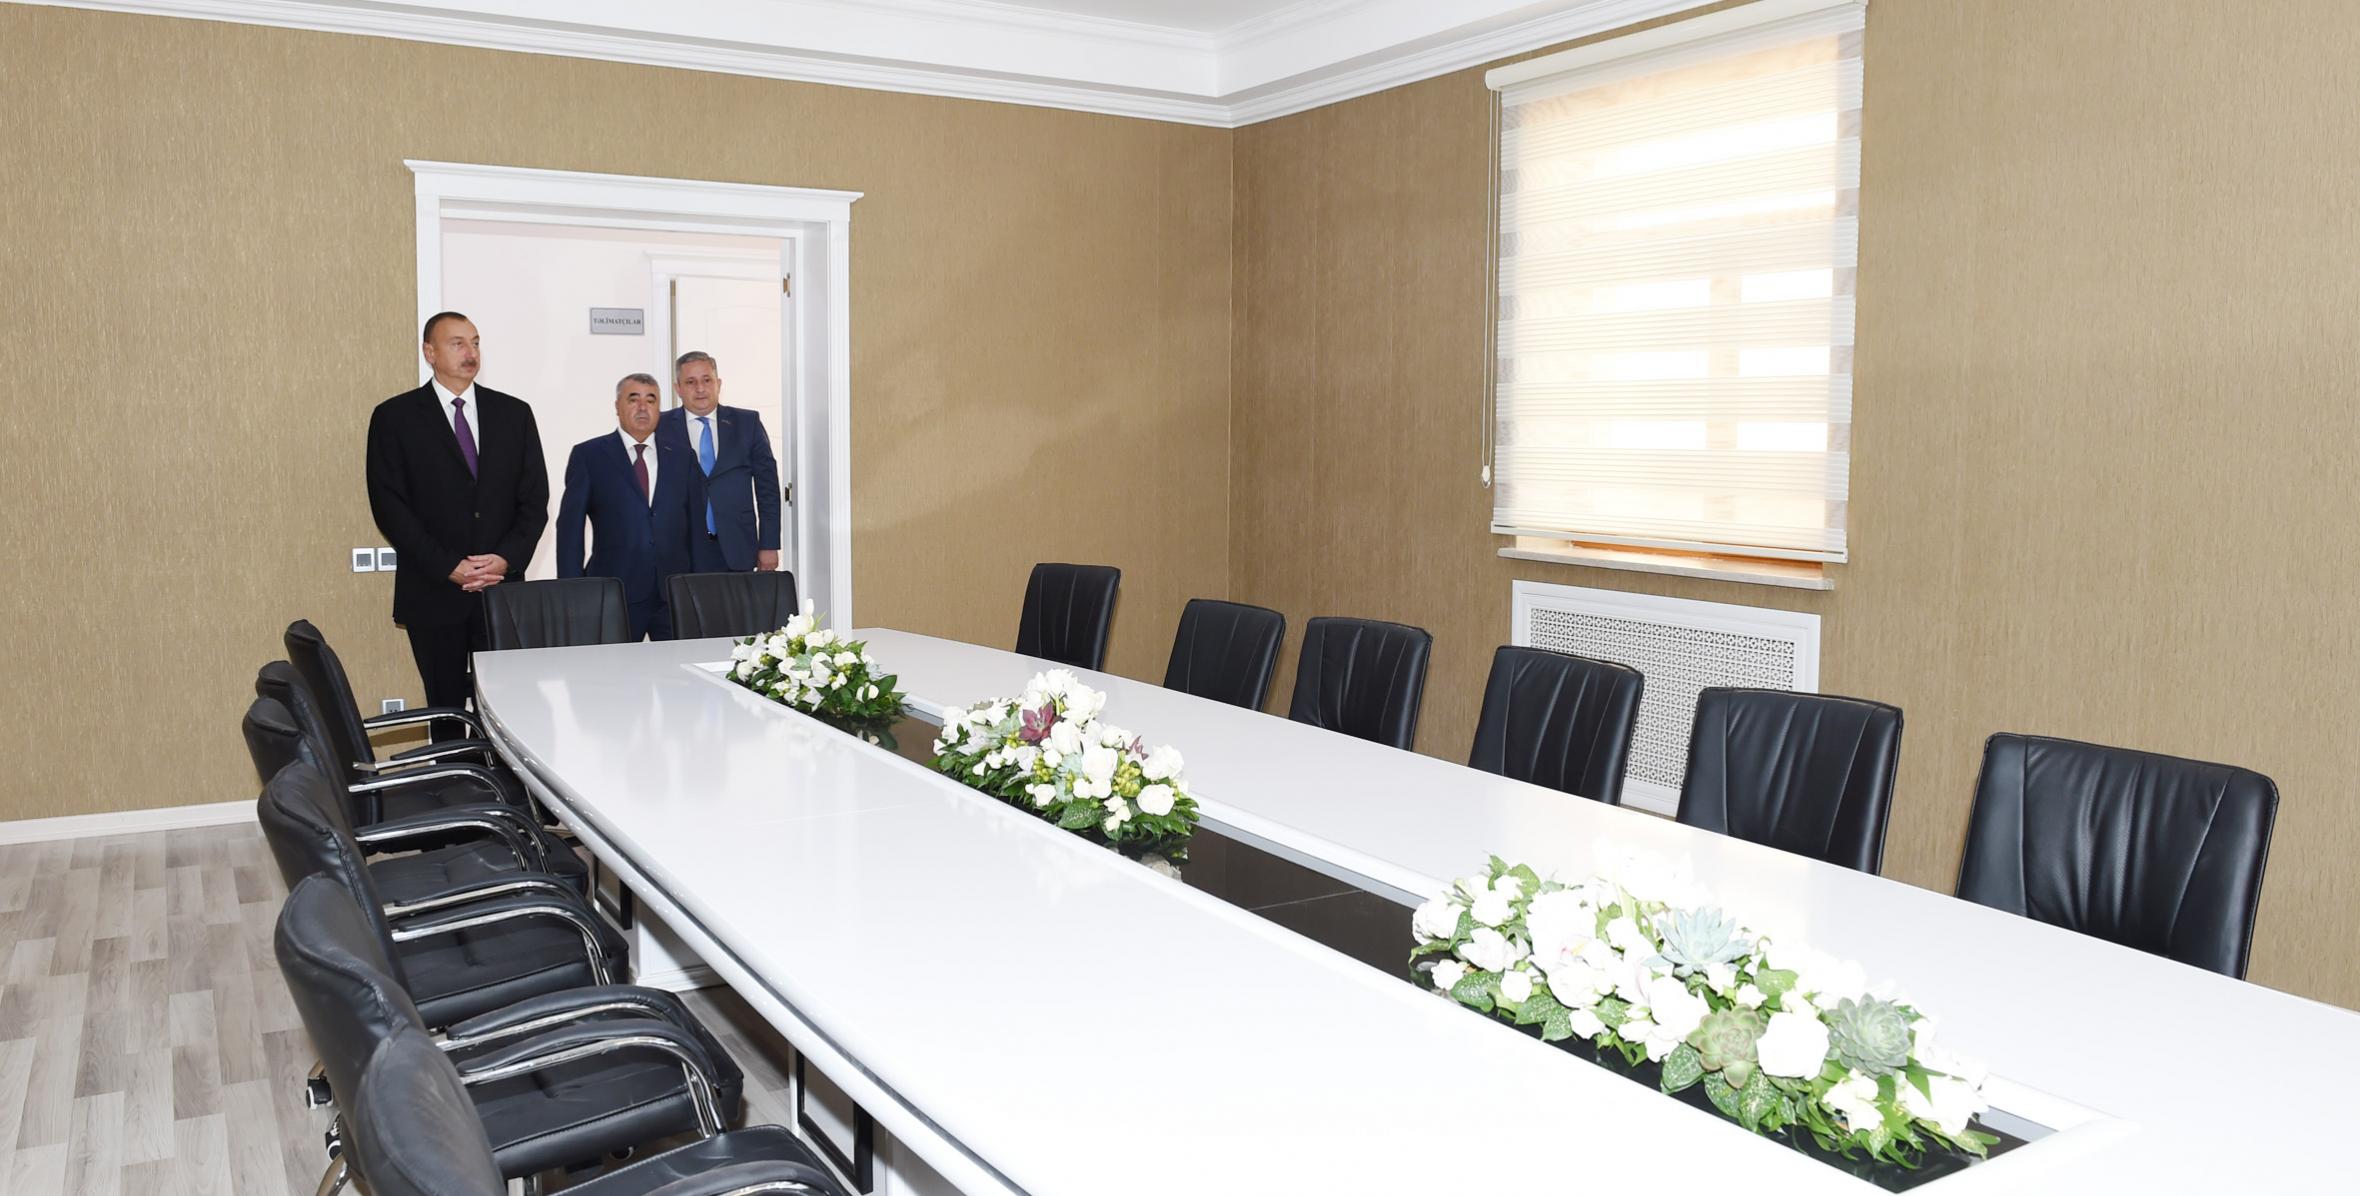 Ilham Aliyev attended the opening of a new administrative building of Goychay District branch of the New Azerbaijan Party